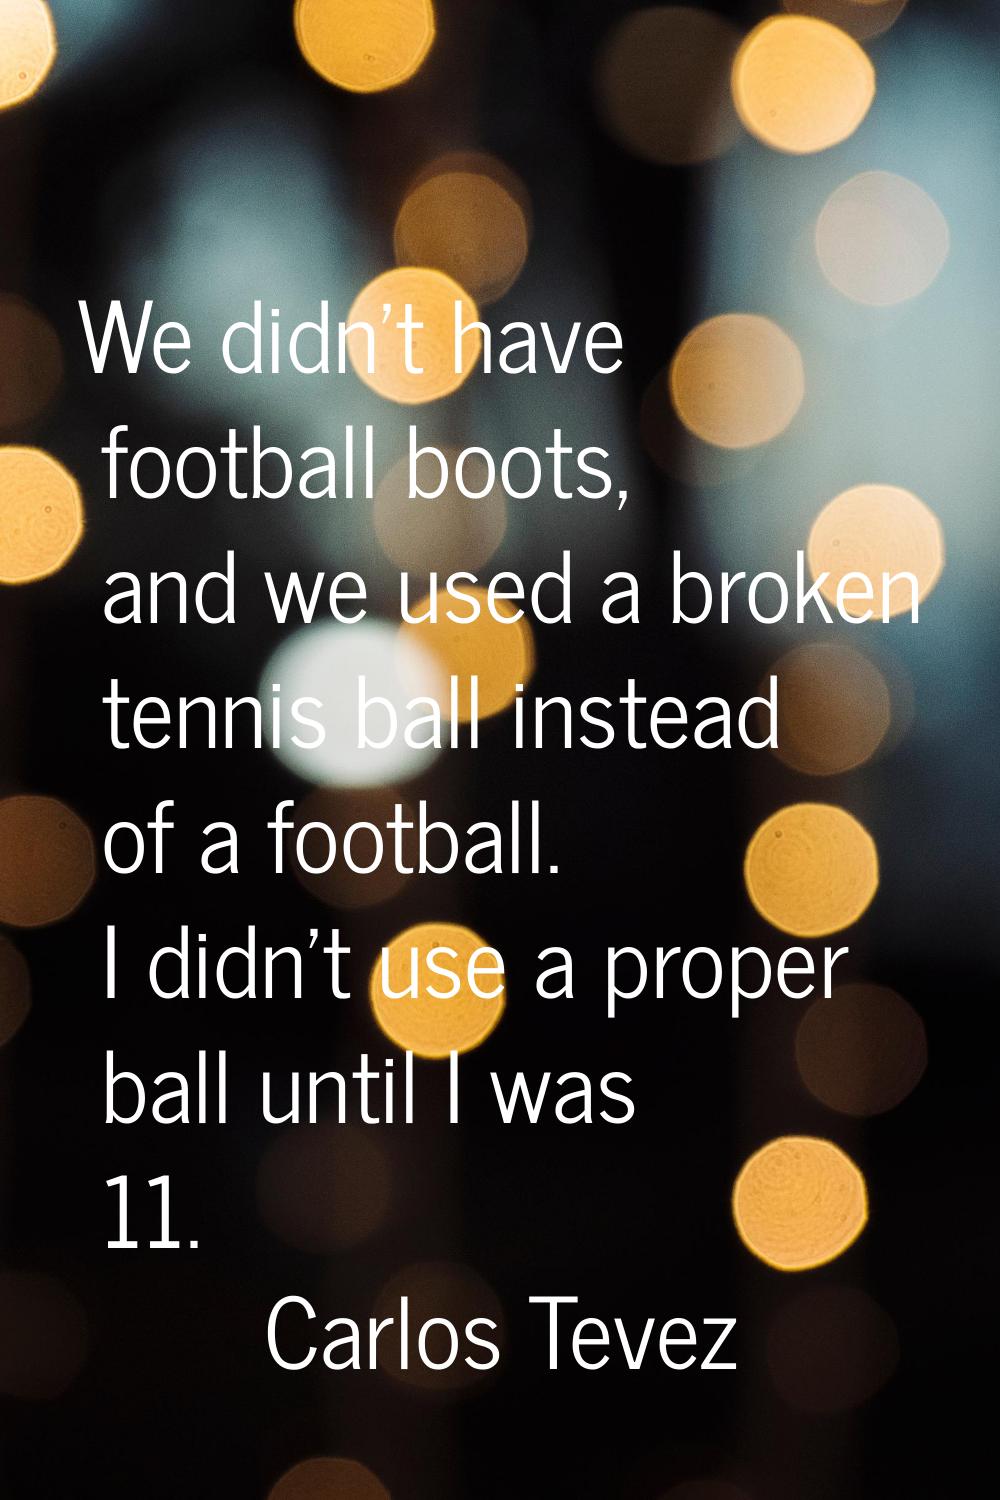 We didn't have football boots, and we used a broken tennis ball instead of a football. I didn't use